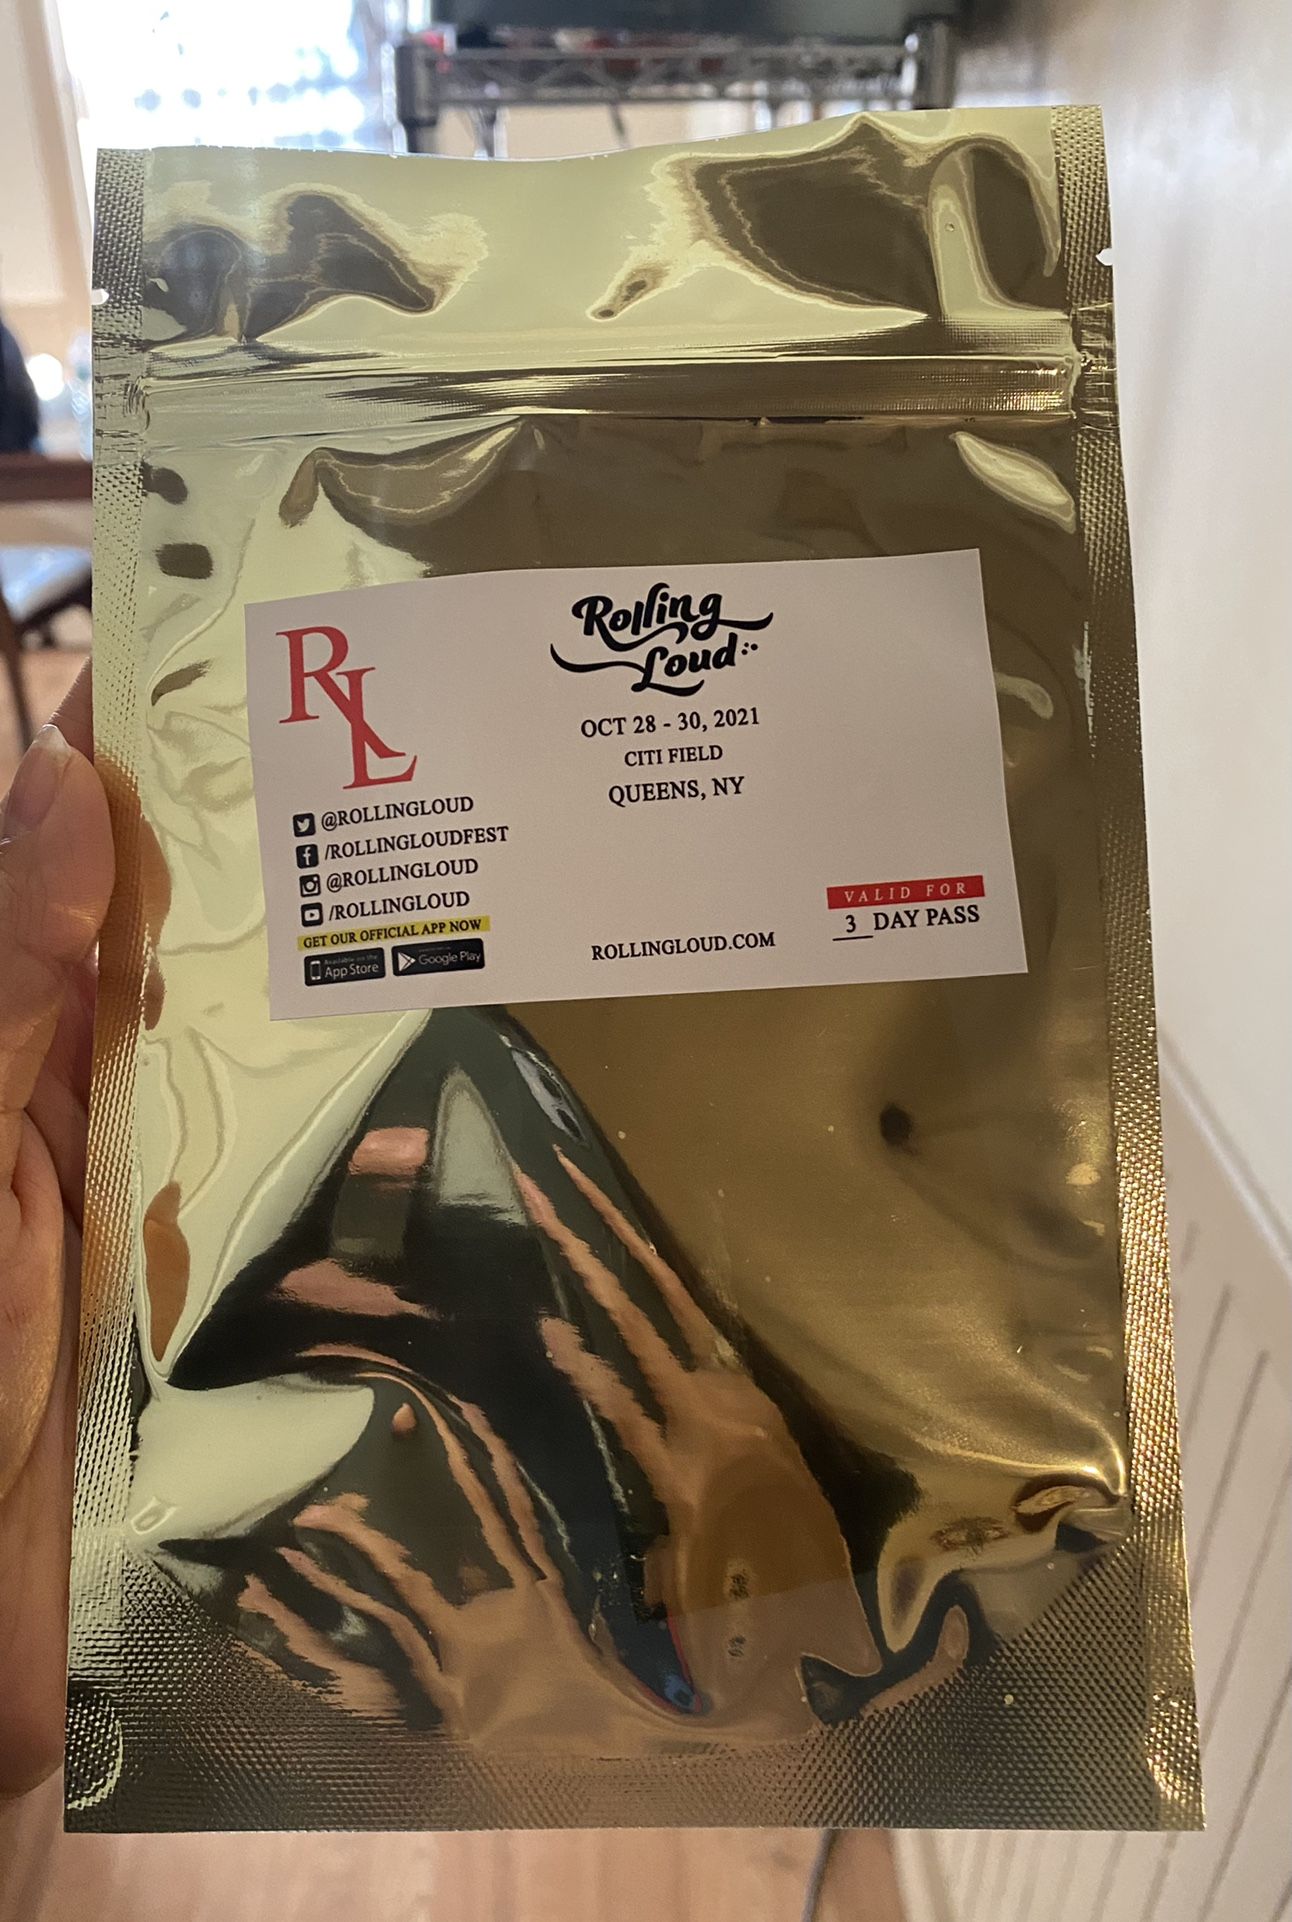 FREE Rolling Loud NY Ticket 2021 Oct 28 - 30 